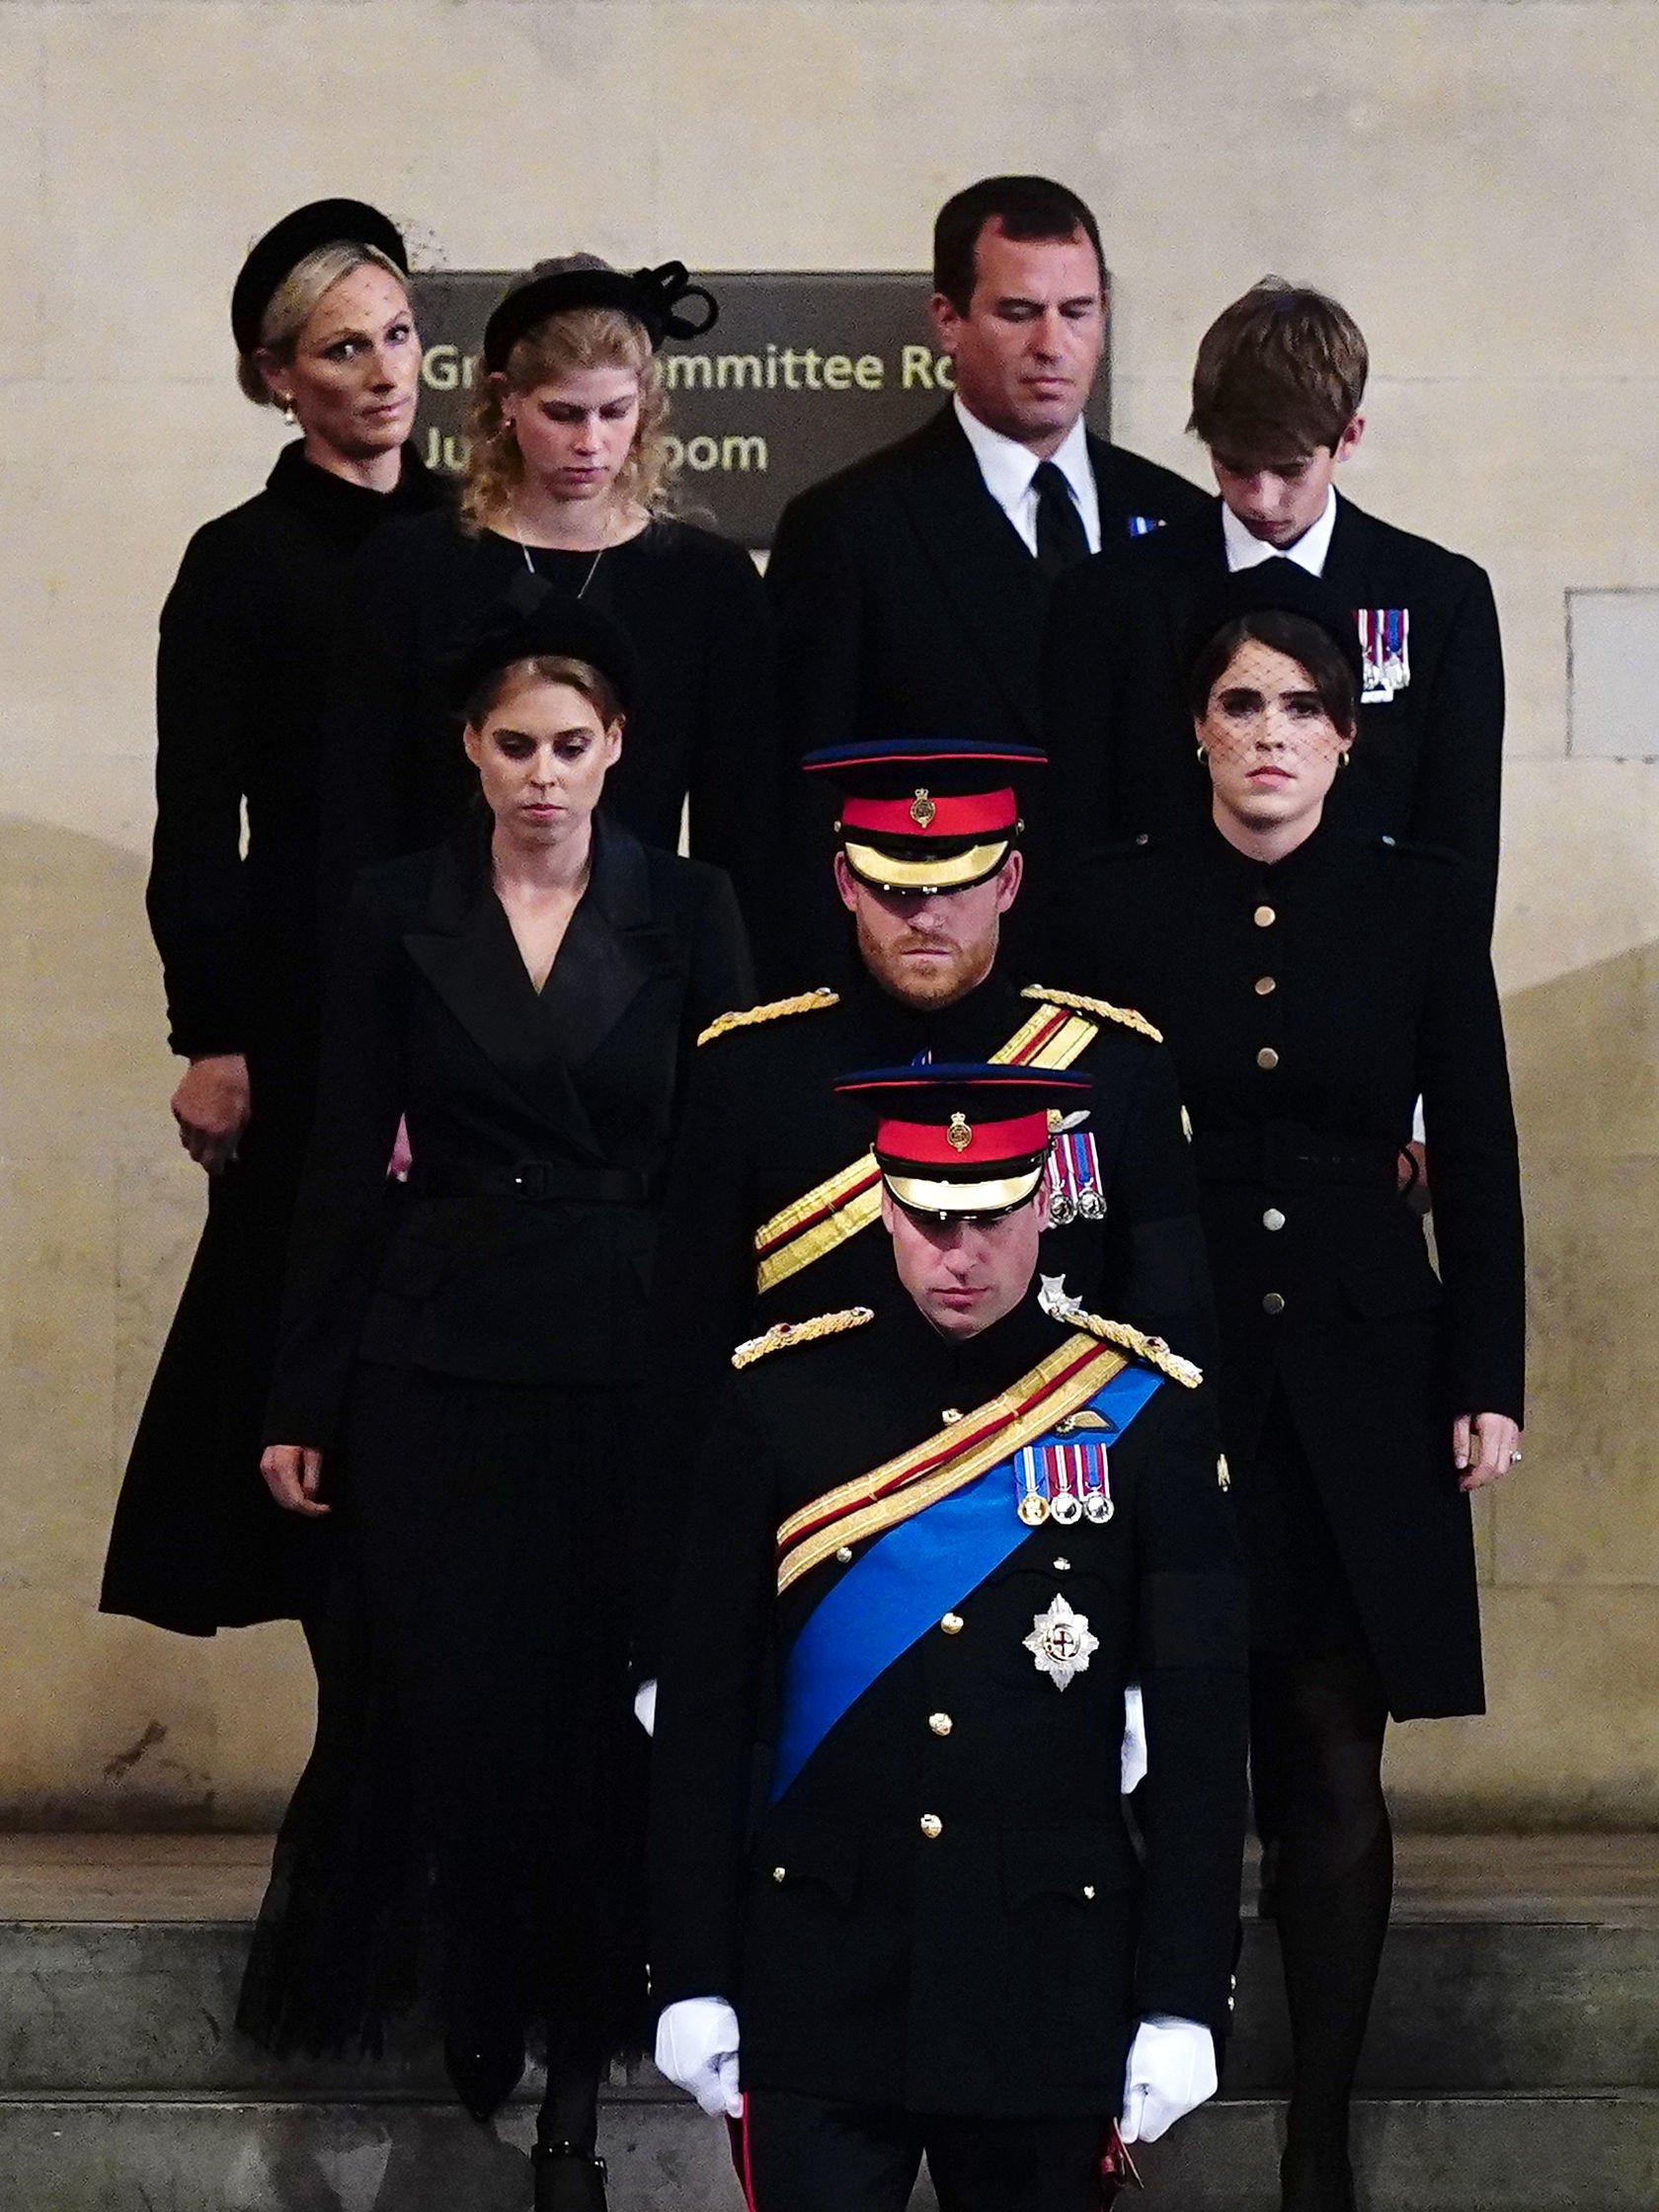 rince William, Prince of Wales, Prince Harry, Duke of Sussex, Princess Eugenie of York, Princess Beatrice of York, Peter Phillips, Zara Tindall, Lady Louise Windsor, James, Viscount Severn arrive to hold a vigil in honour of Queen Elizabeth II at Westminster Hall on September 17, 2022 in London, England | Source: Getty Images 